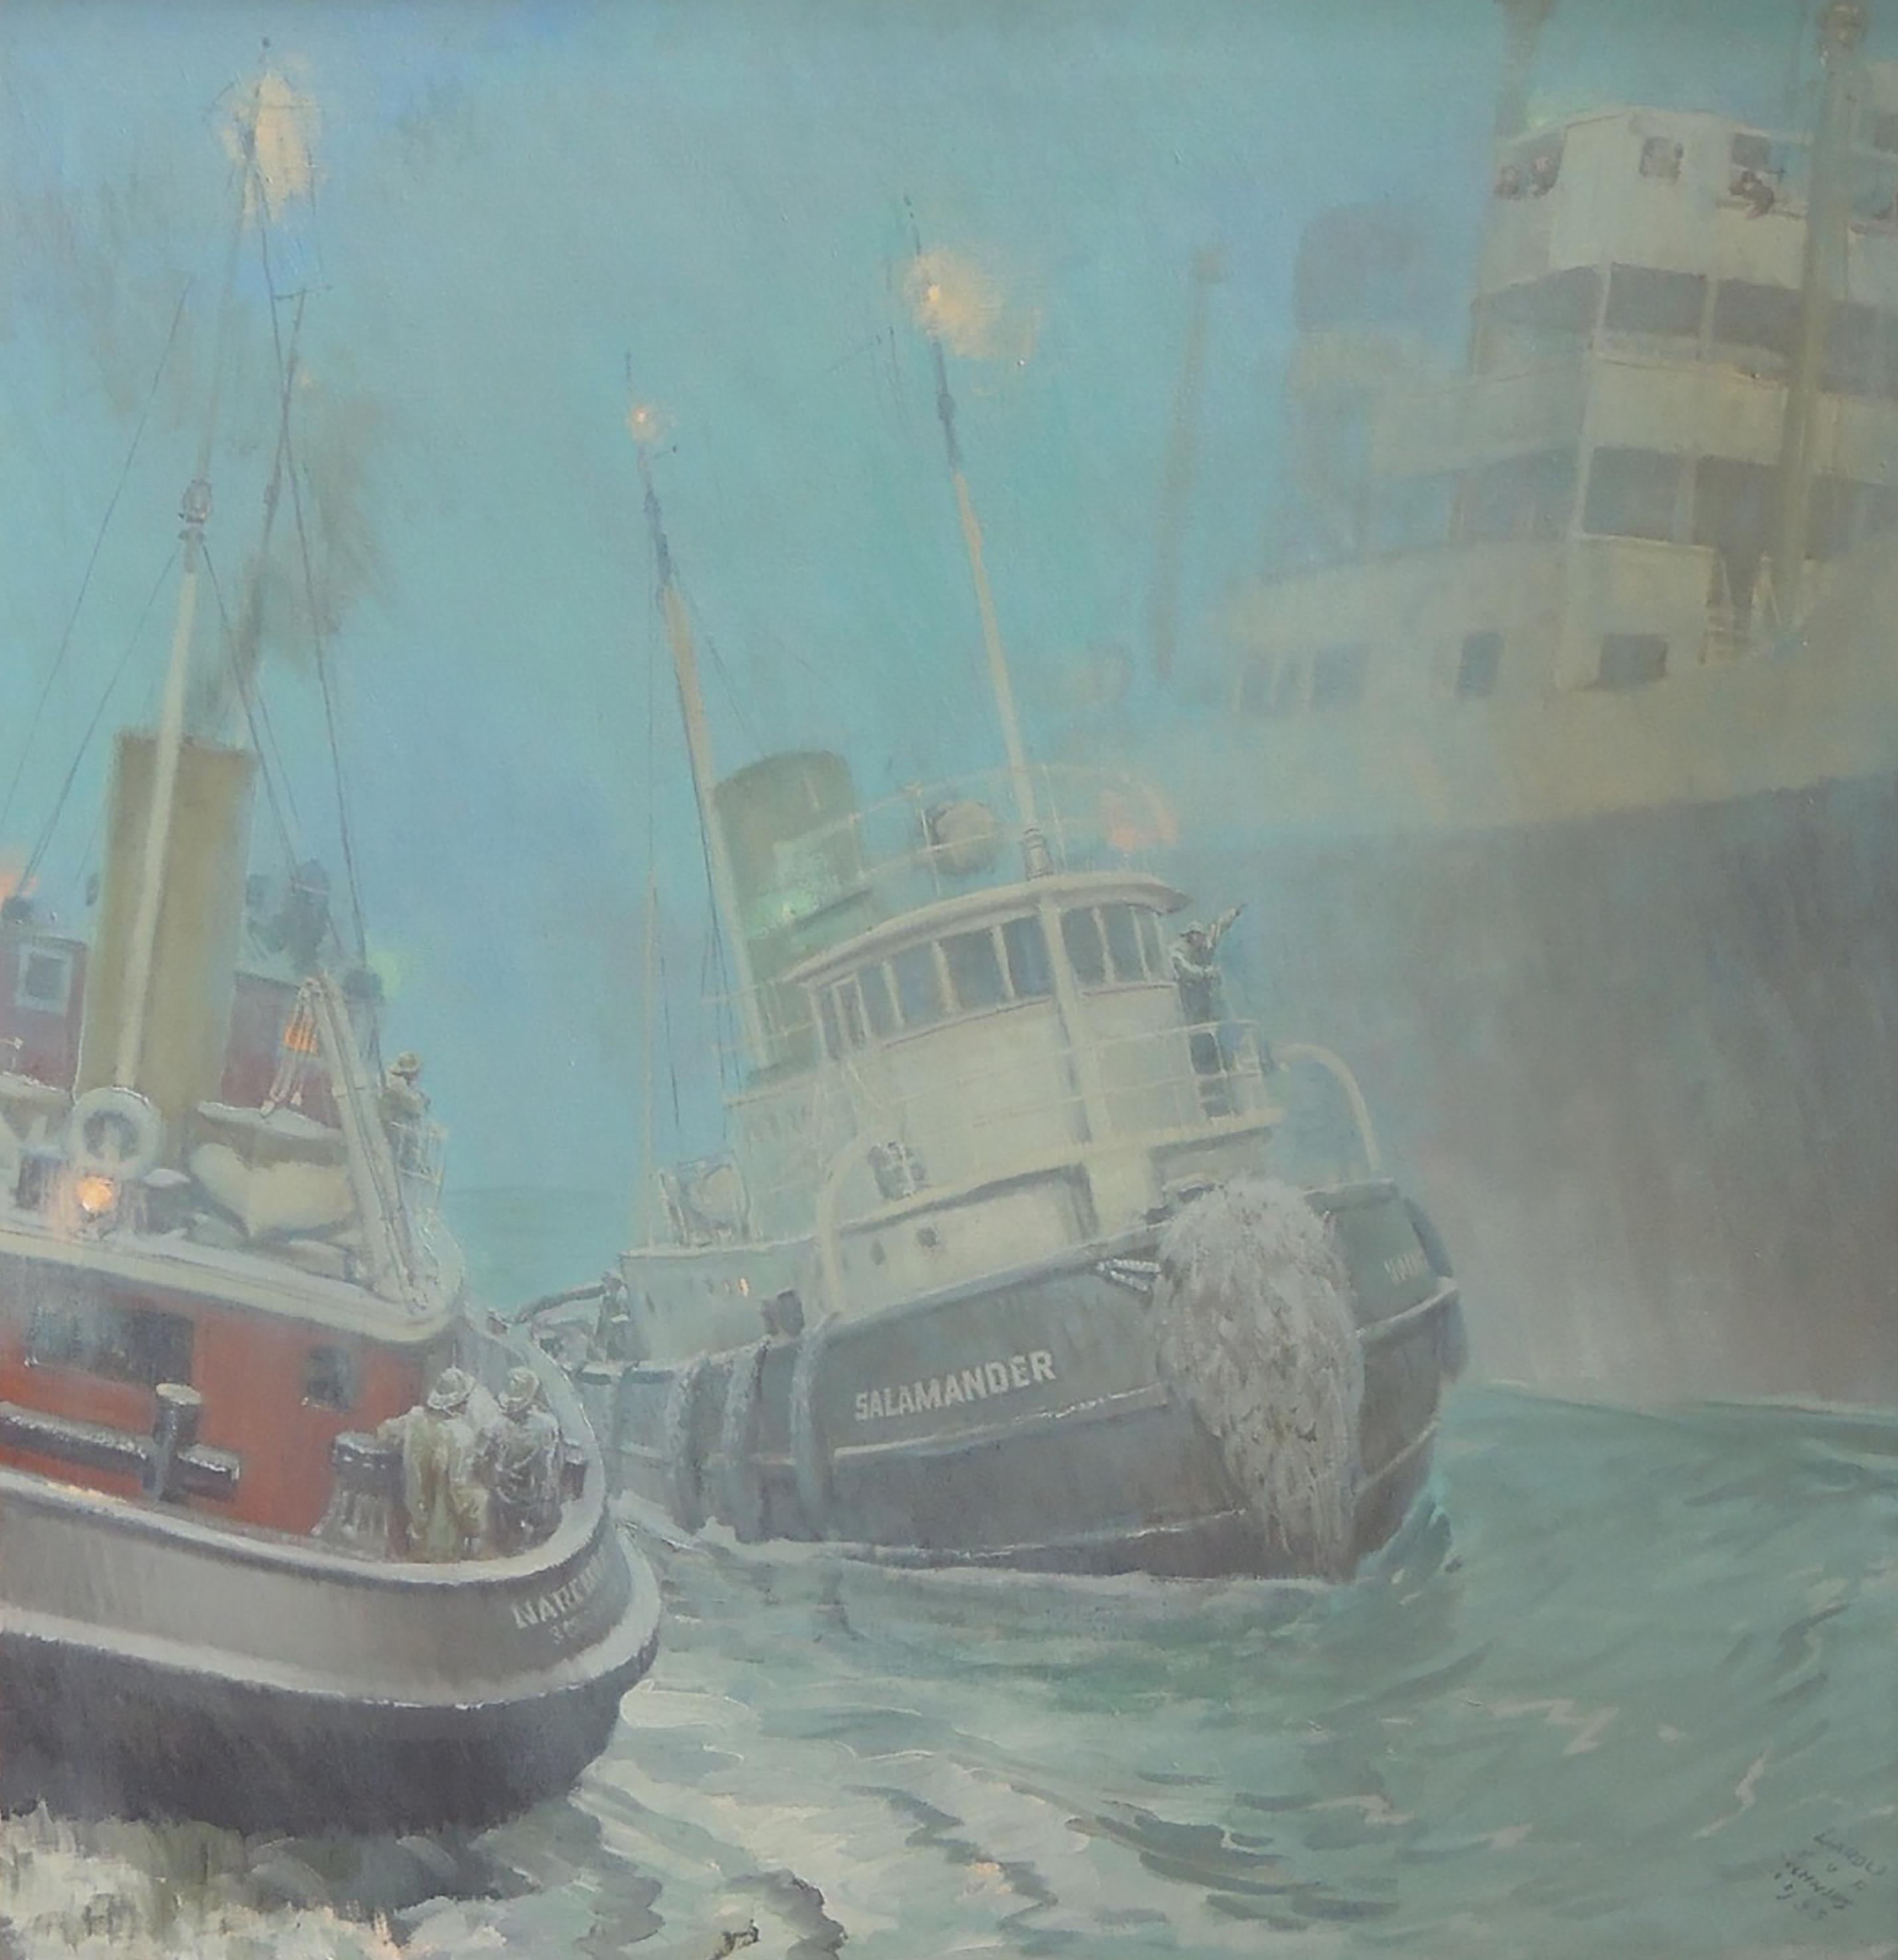 An Illustration from "Tugboat Annie" - Painting by Harold von Schmidt